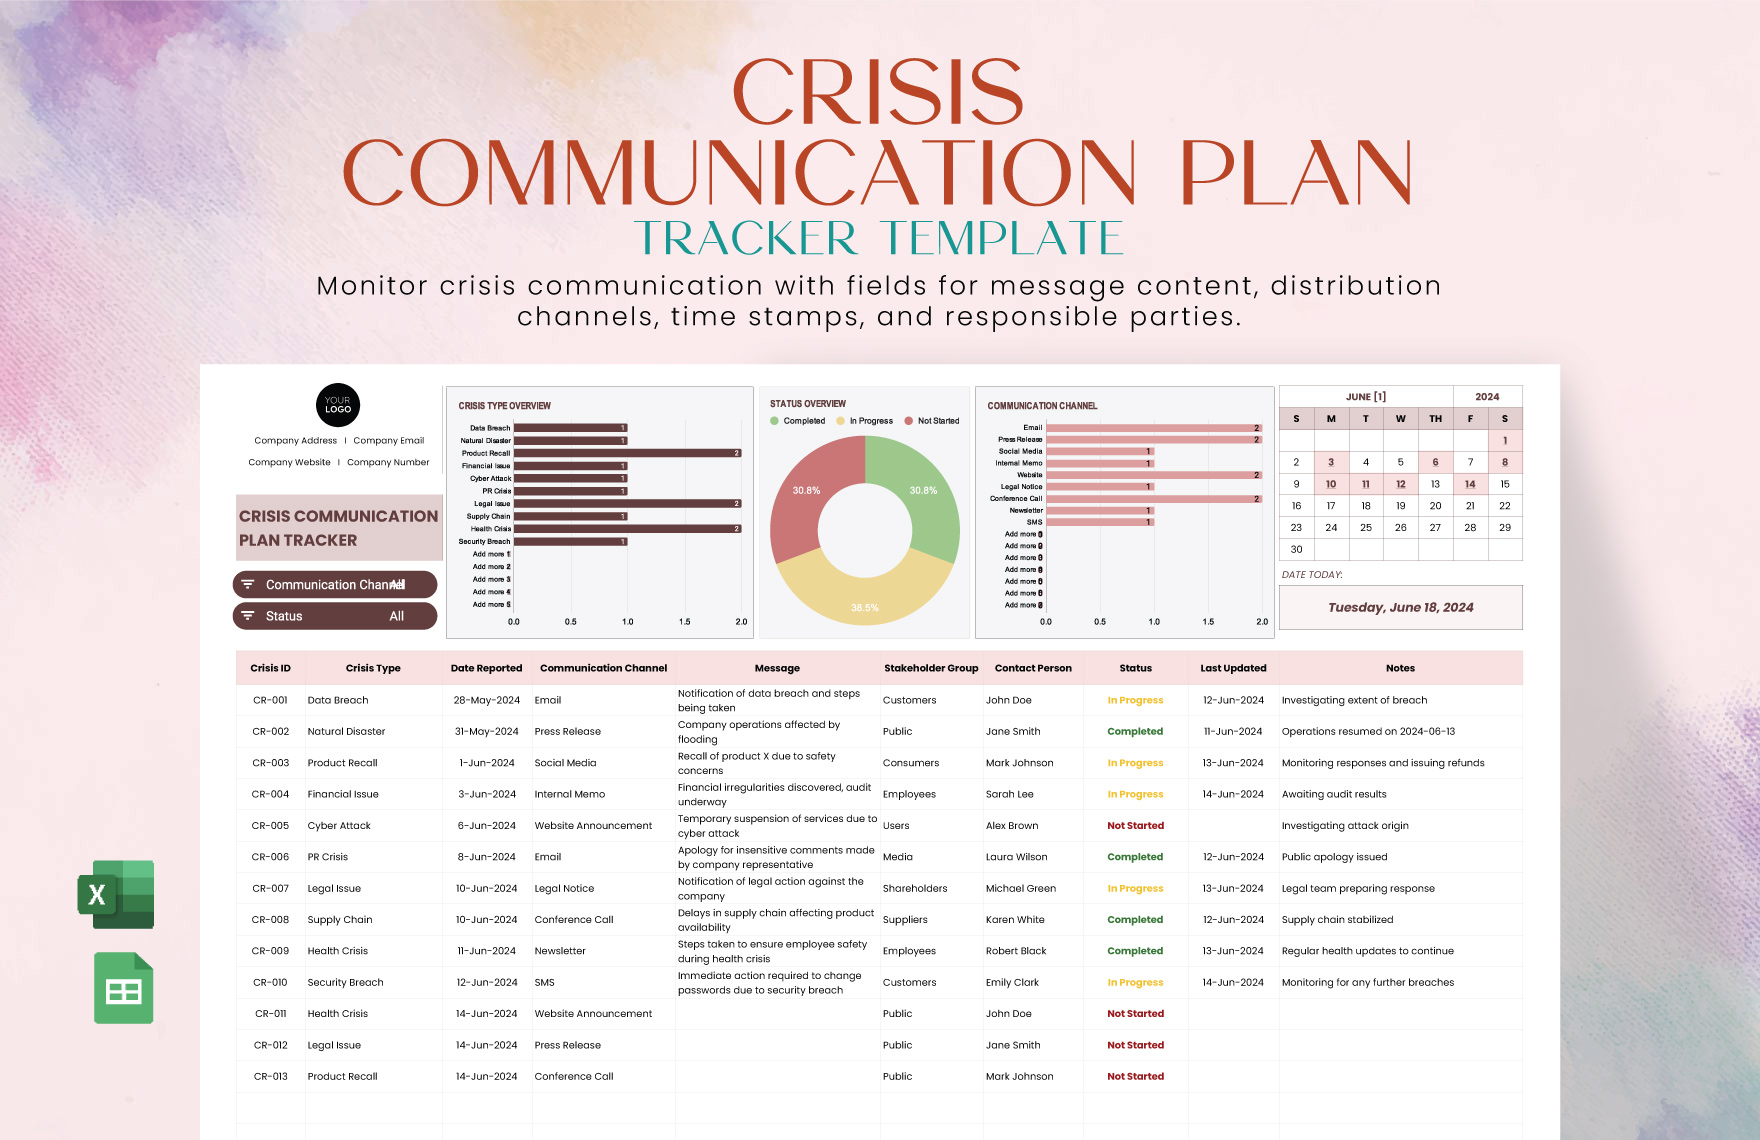 Crisis Communication Plan Tracker Template in Excel, Google Sheets